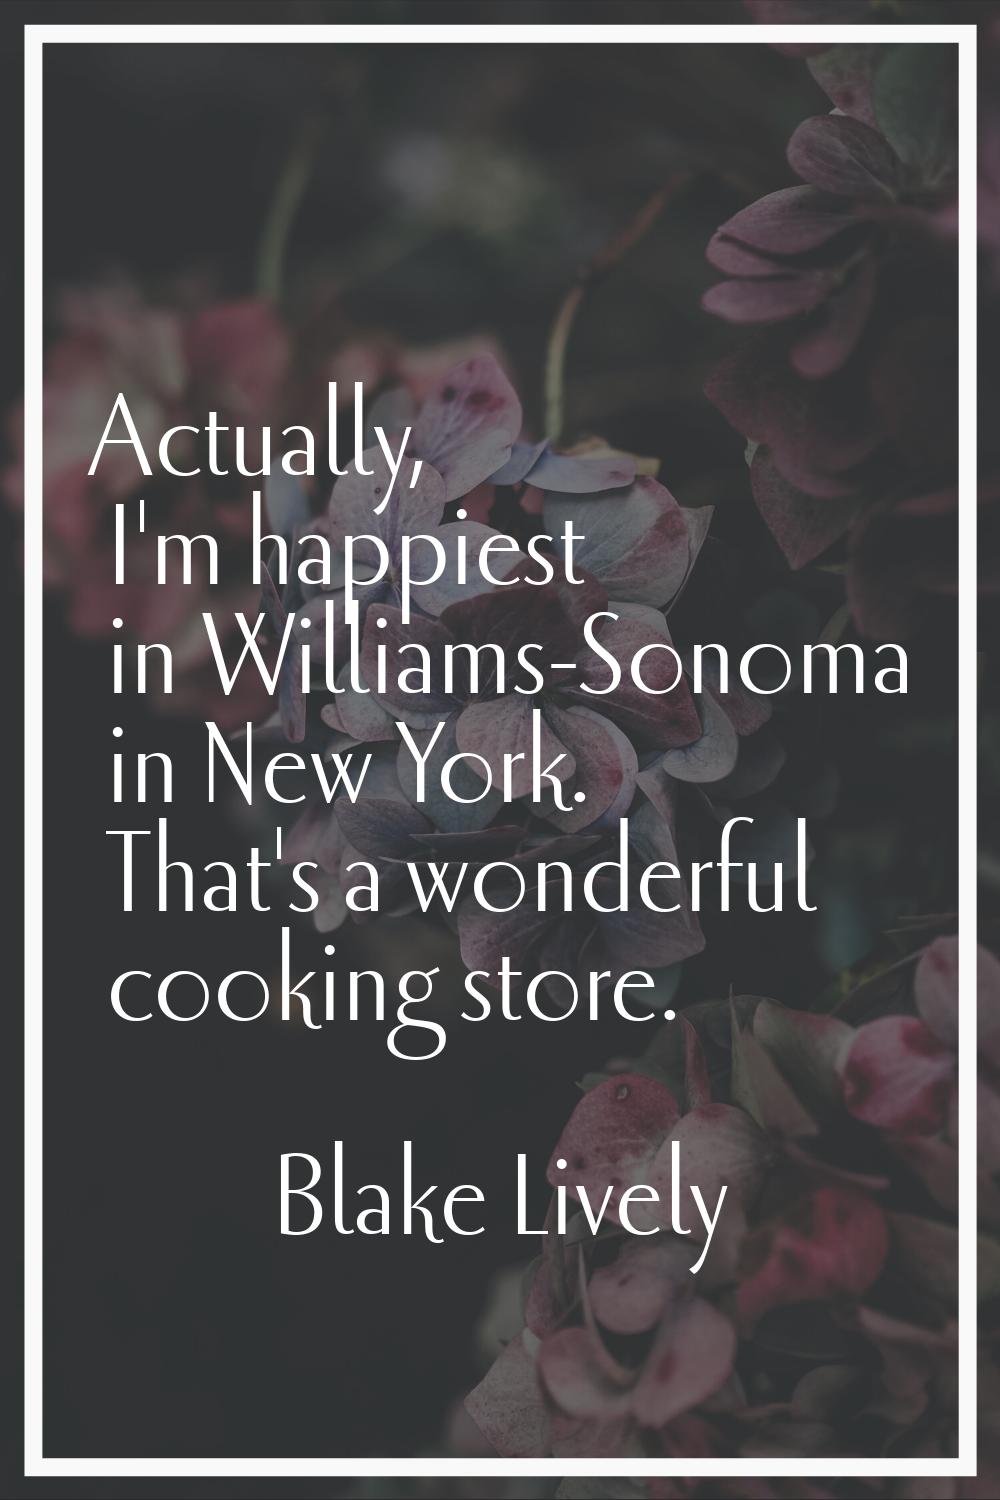 Actually, I'm happiest in Williams-Sonoma in New York. That's a wonderful cooking store.